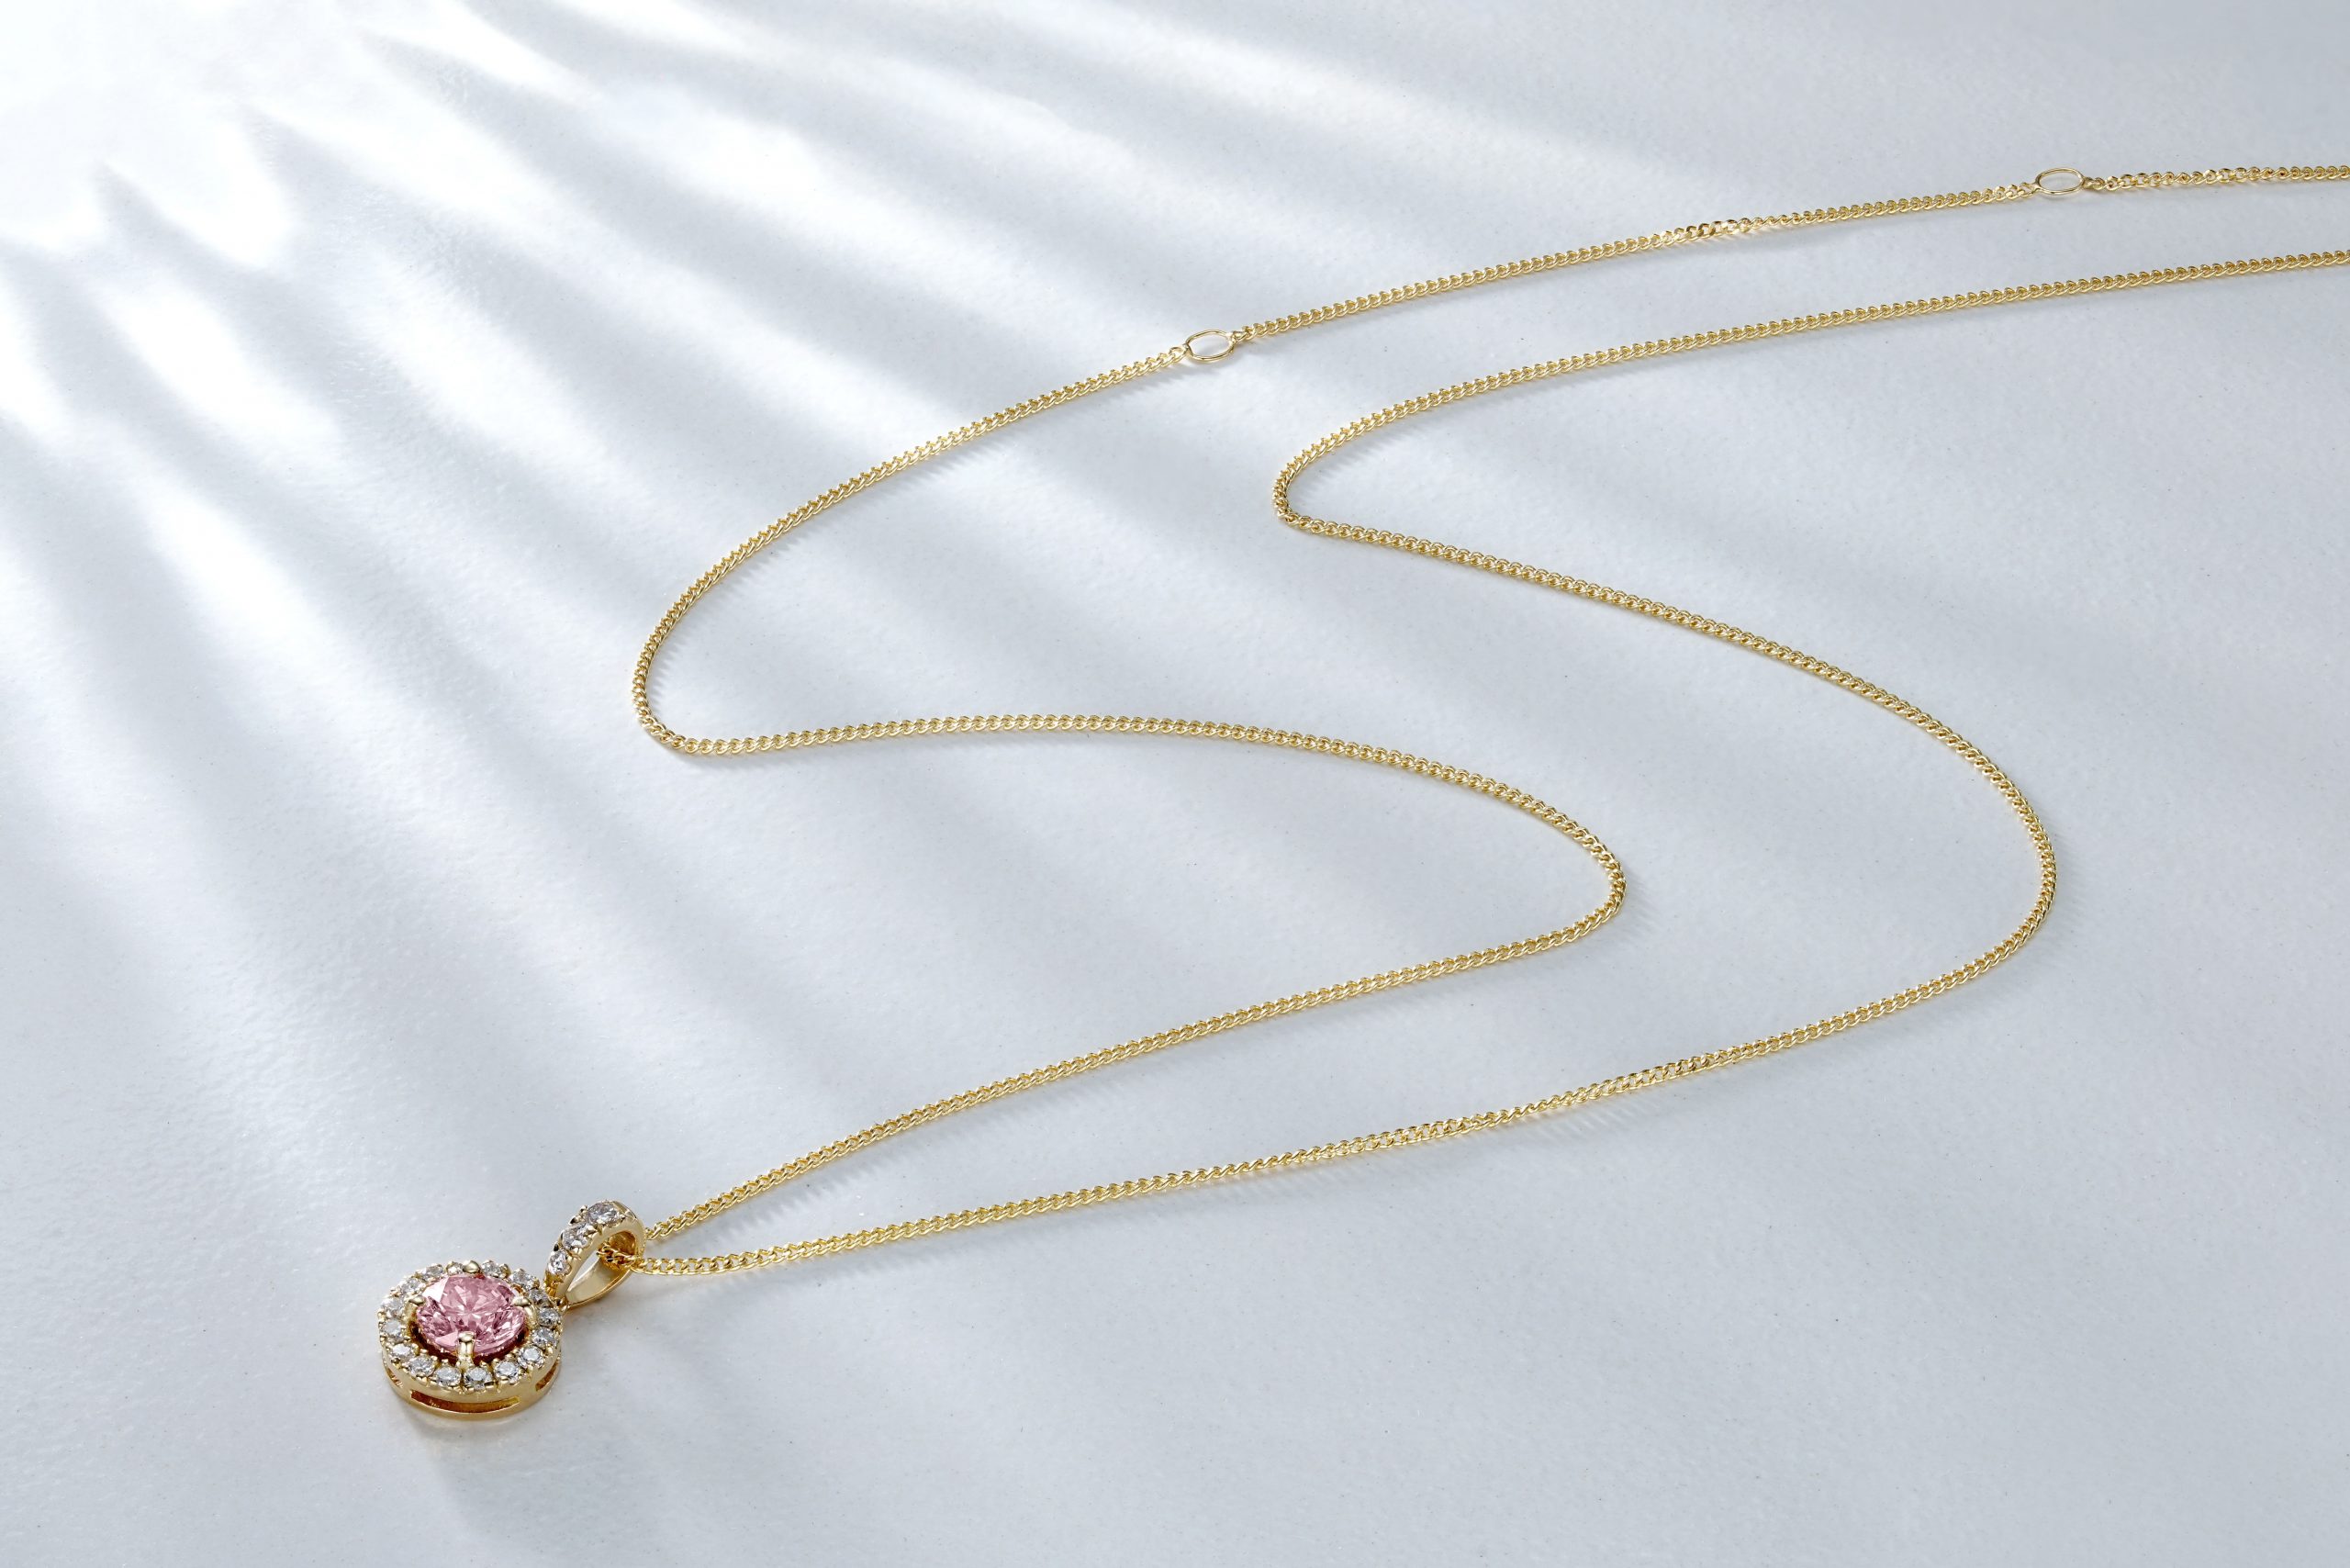 Gold necklace with pink stone